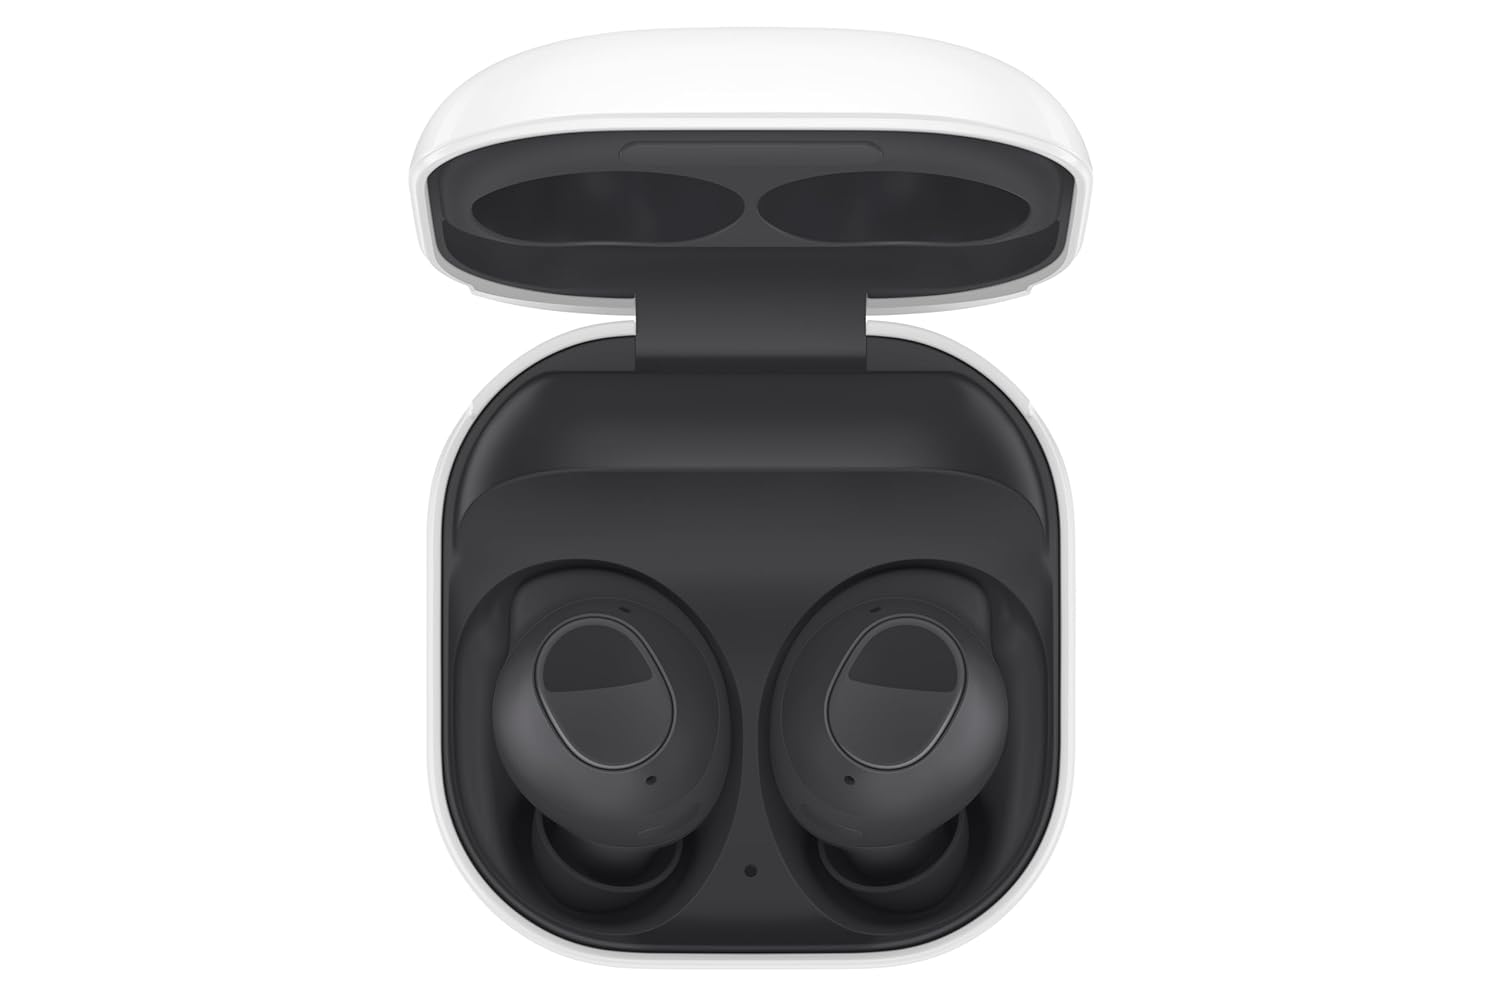 Samsung Galaxy Buds FE (Graphite)| Powerful Active Noise Cancellation | Enriched Bass Sound | Ergonomic Design | 30-Hour Battery Life - Mahajan Electronics Online